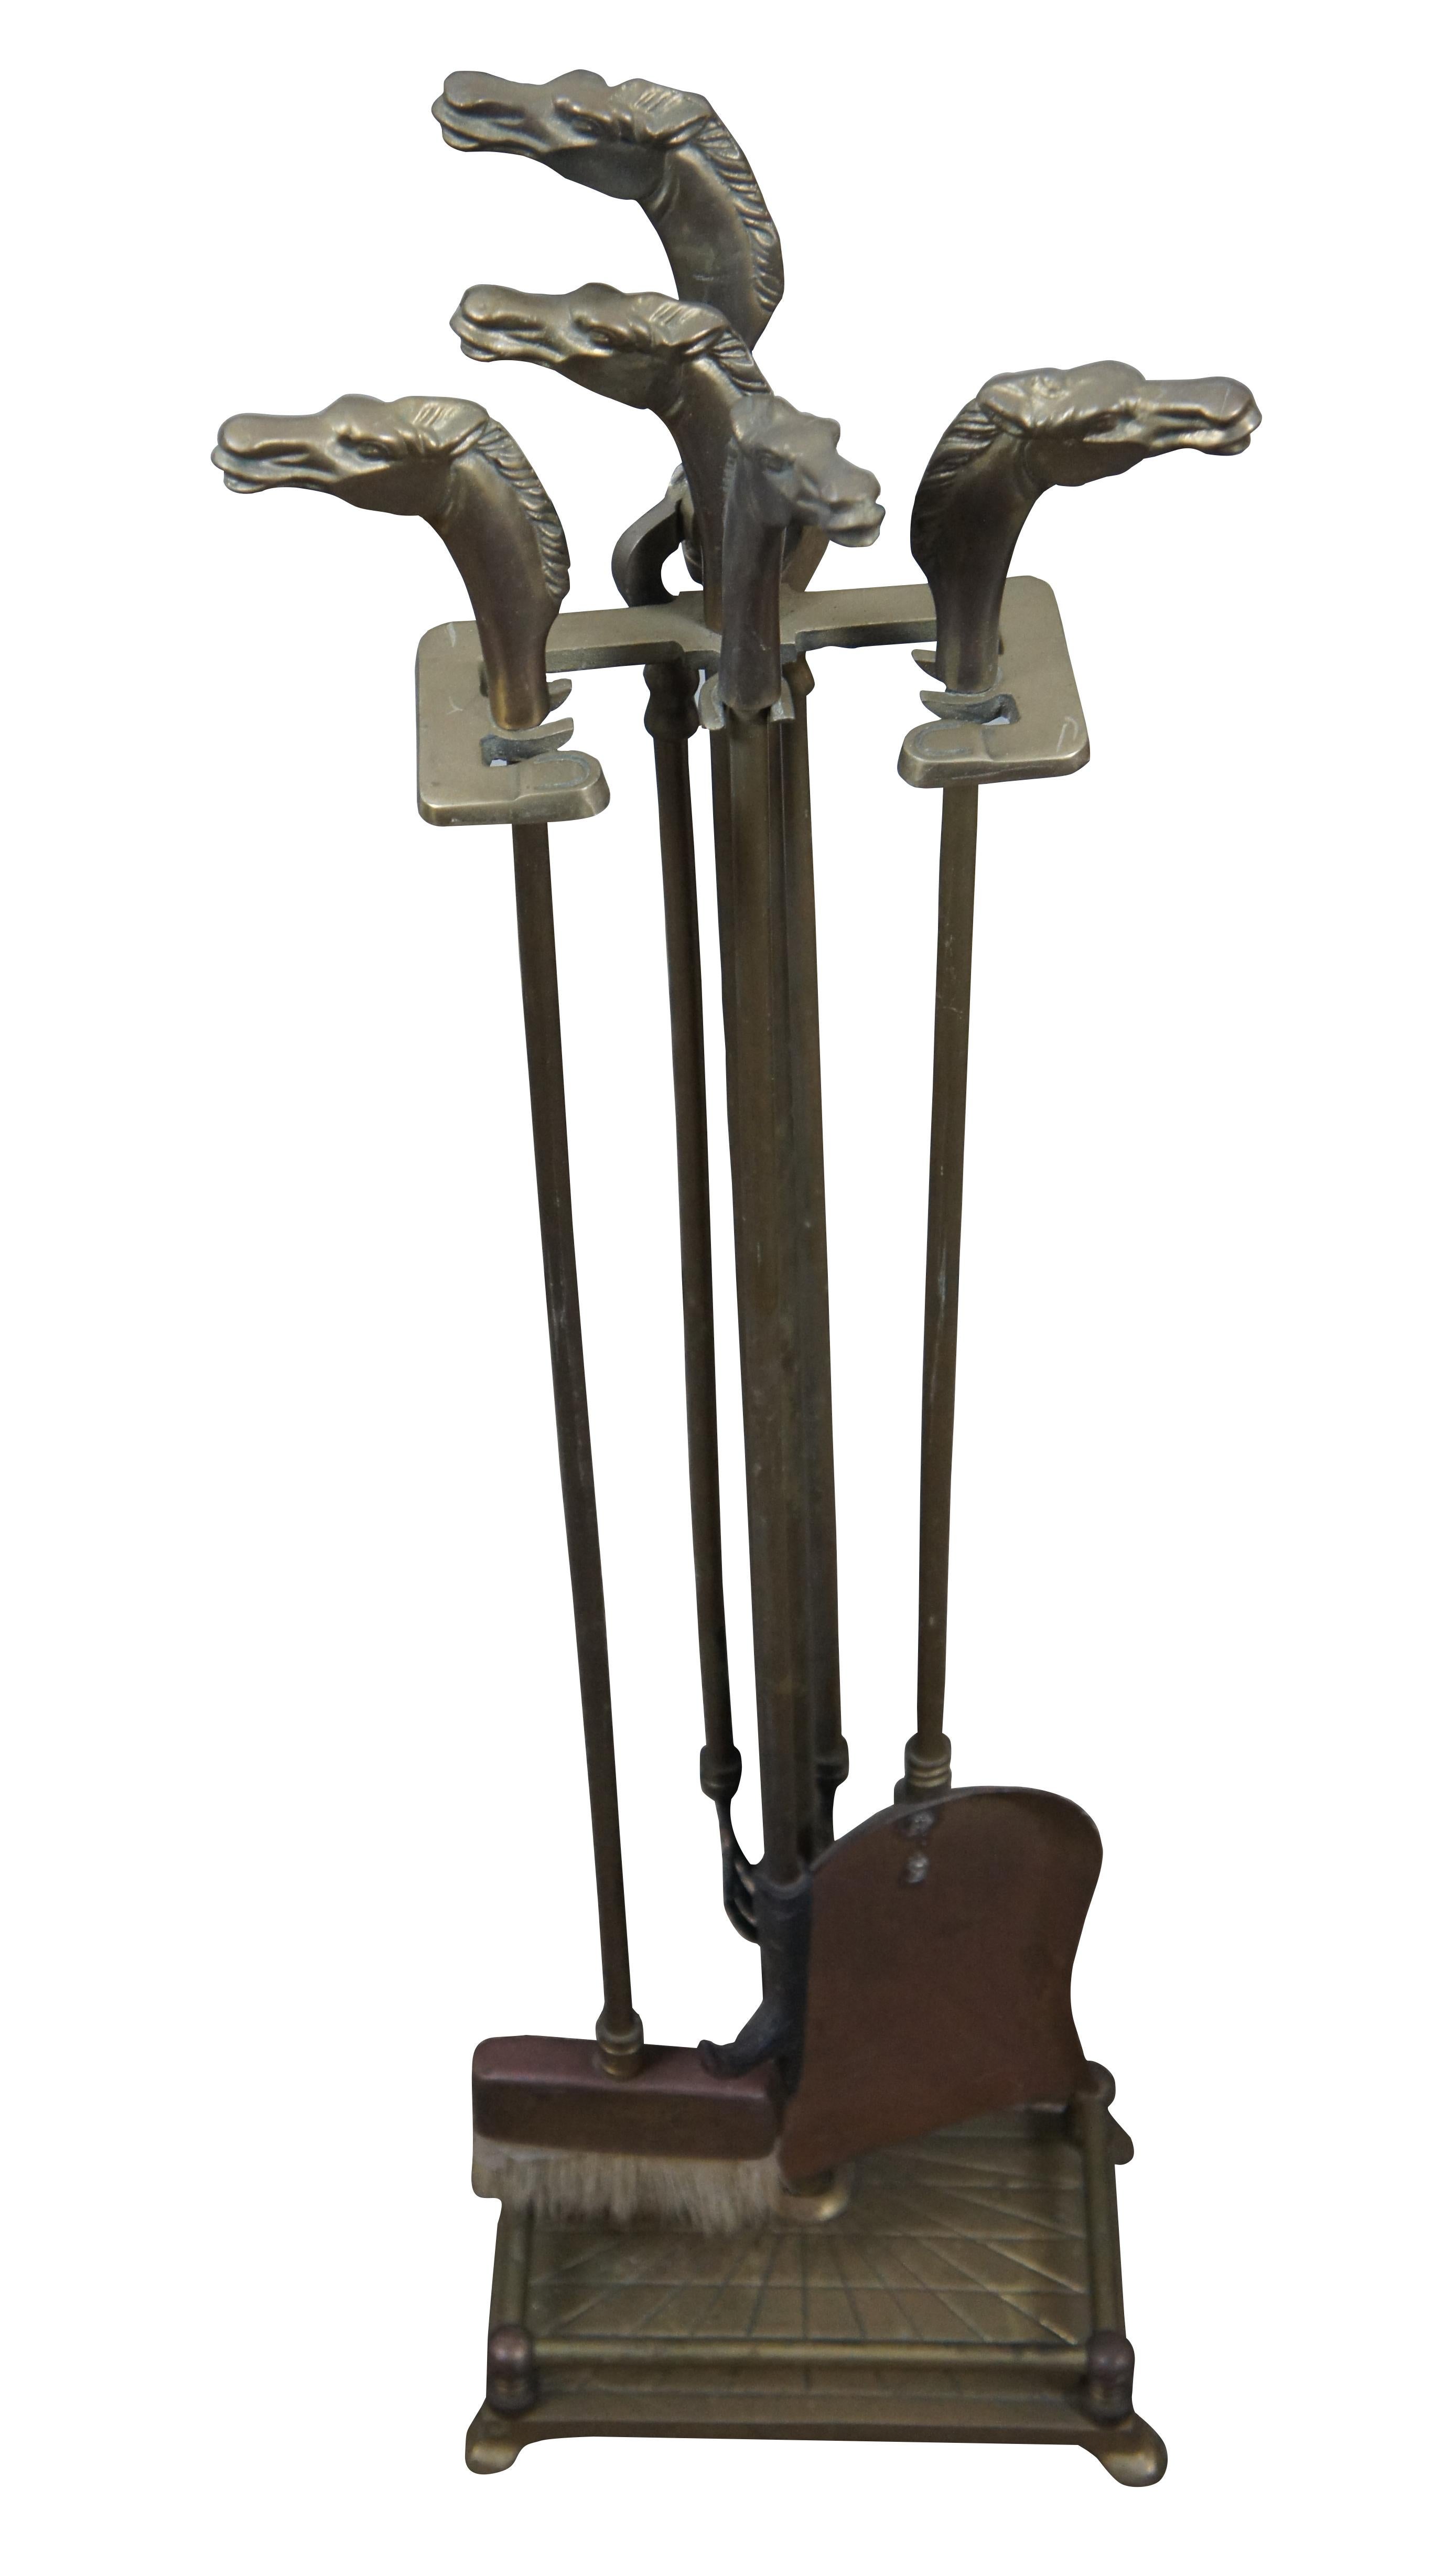 Mid-20th Century five piece set of brass fireplace tools with horse head finials, by Decorative Crafts, Inc. Set includes stand with rectangular base and sunburst detail, tongs, shovel, poker, and brush, all topped with a horse’s head. Base also